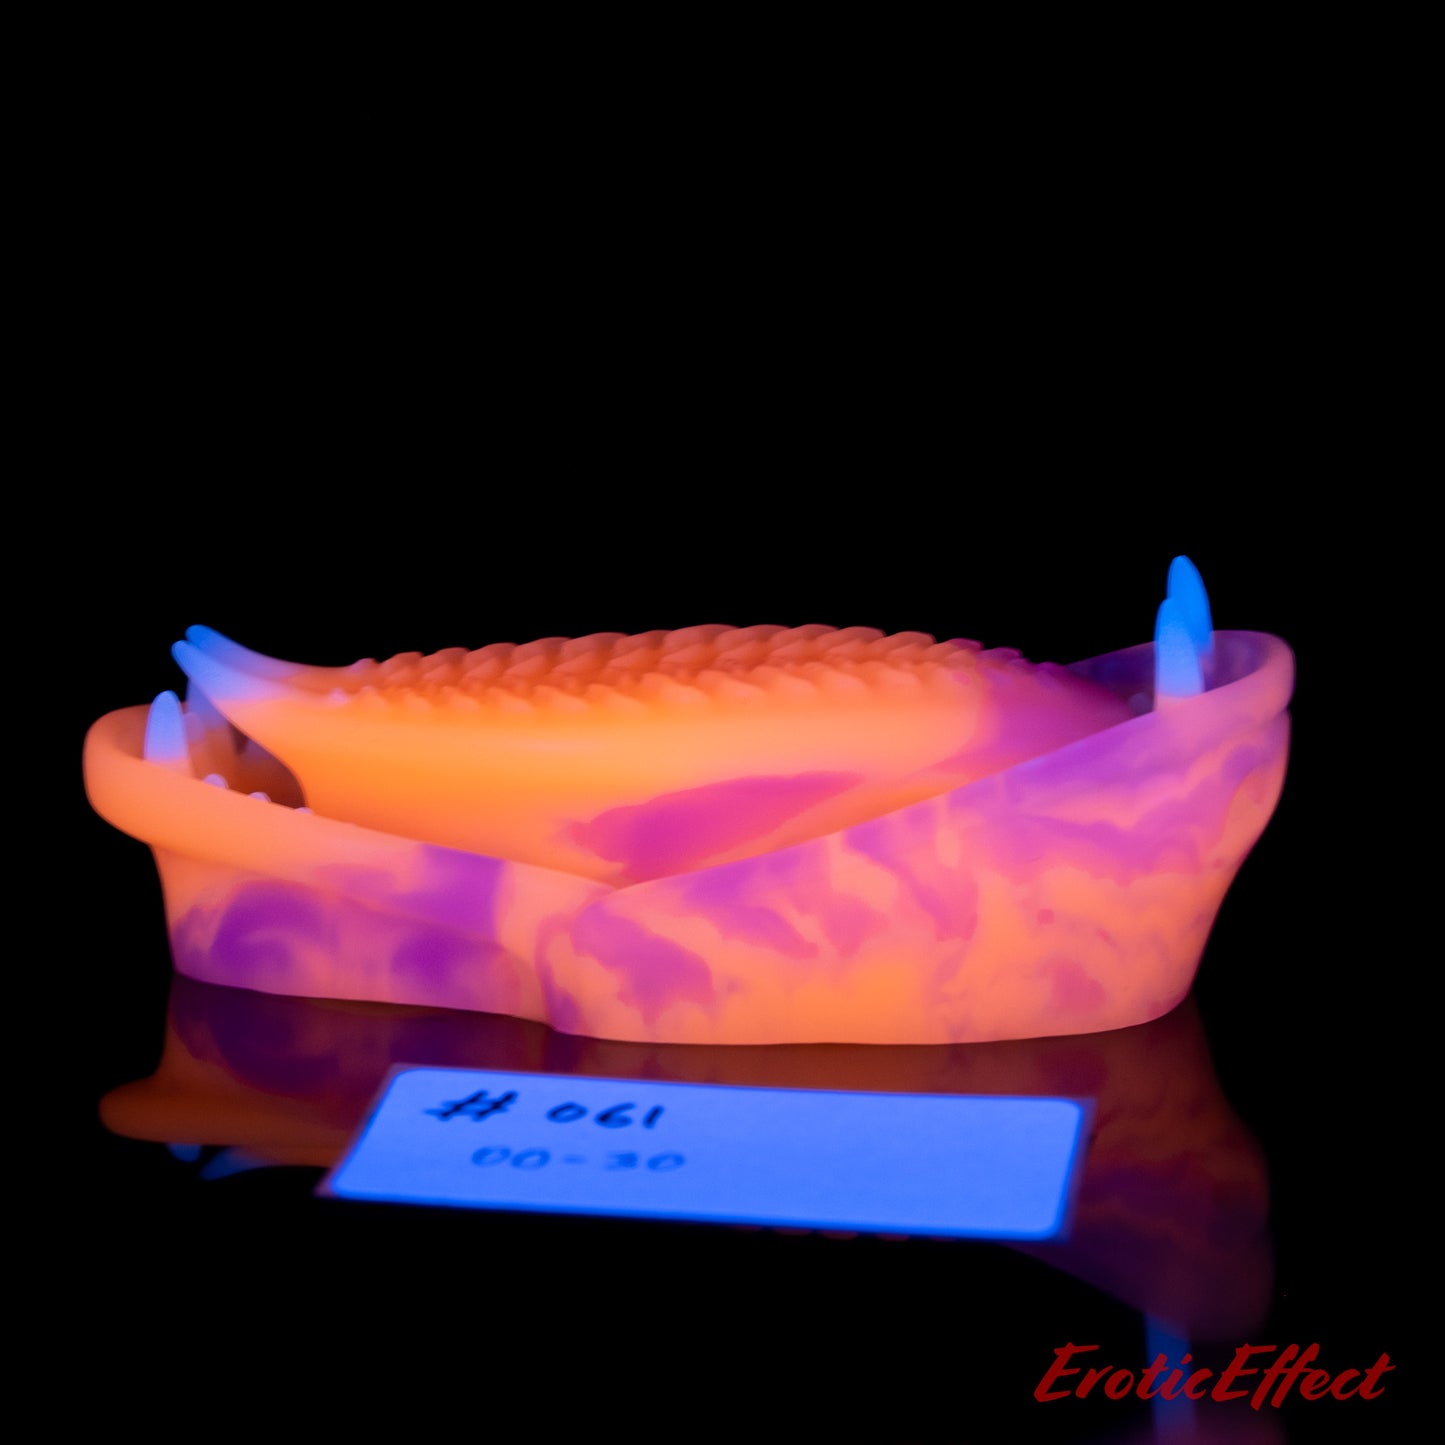 Ecthir Silicone Grindable - Soft Firmness - 061